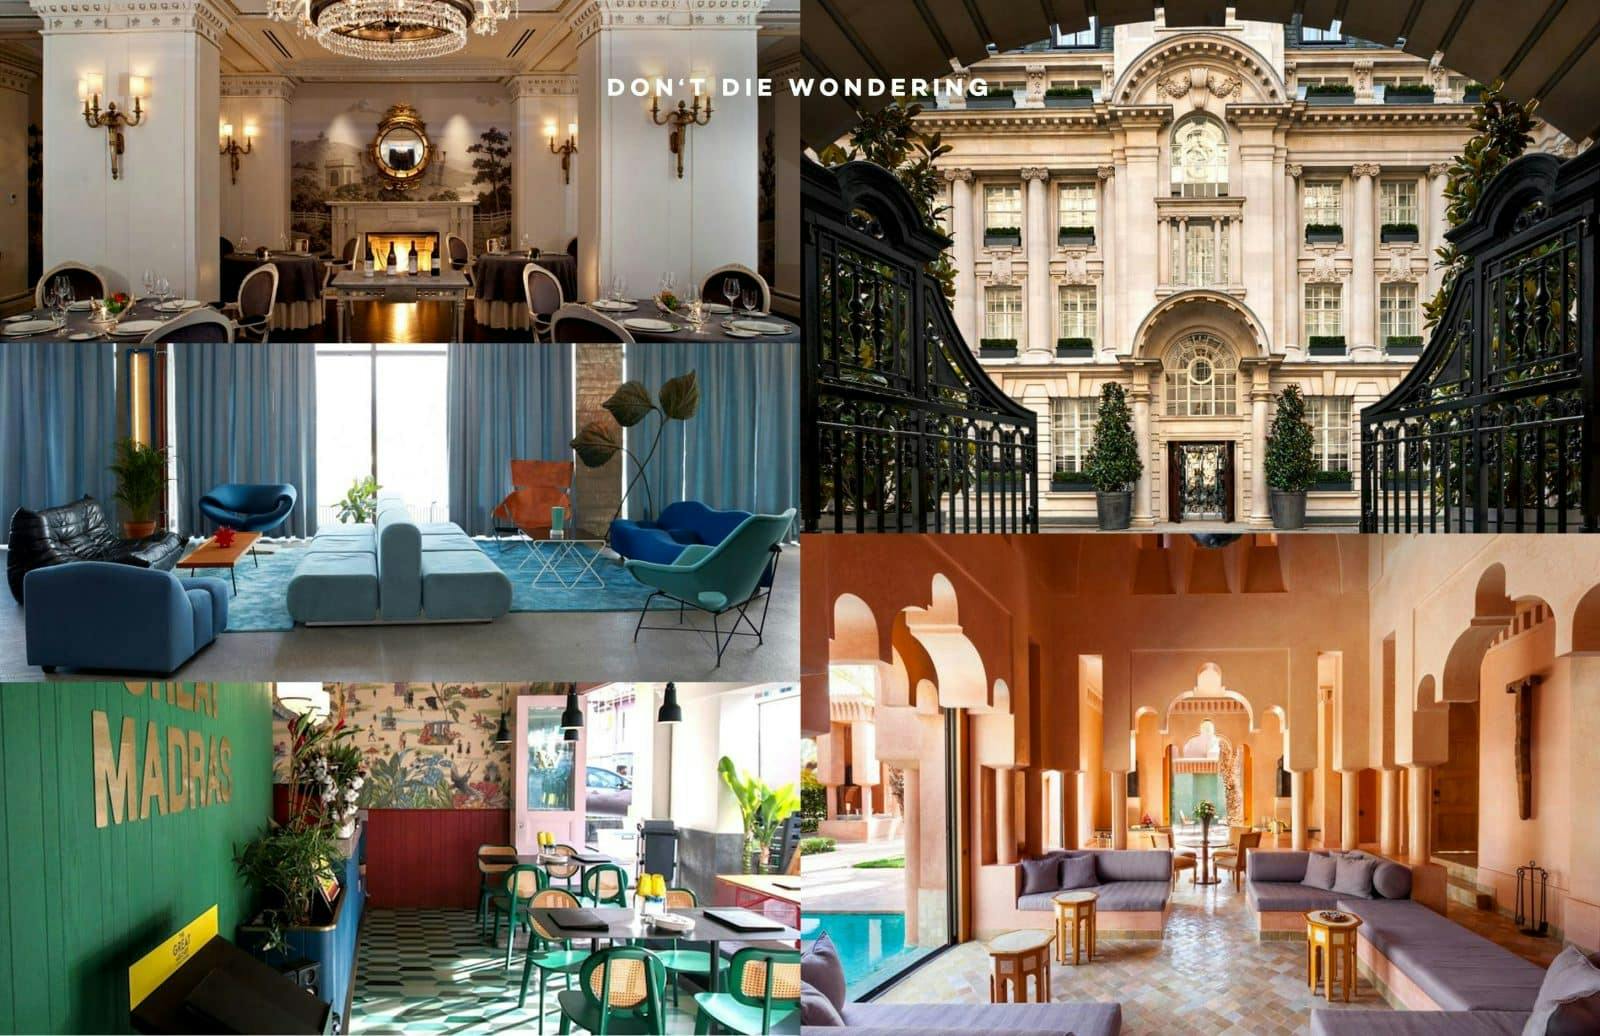 8 Hotels That Look Like A Wes Anderson Movie Set